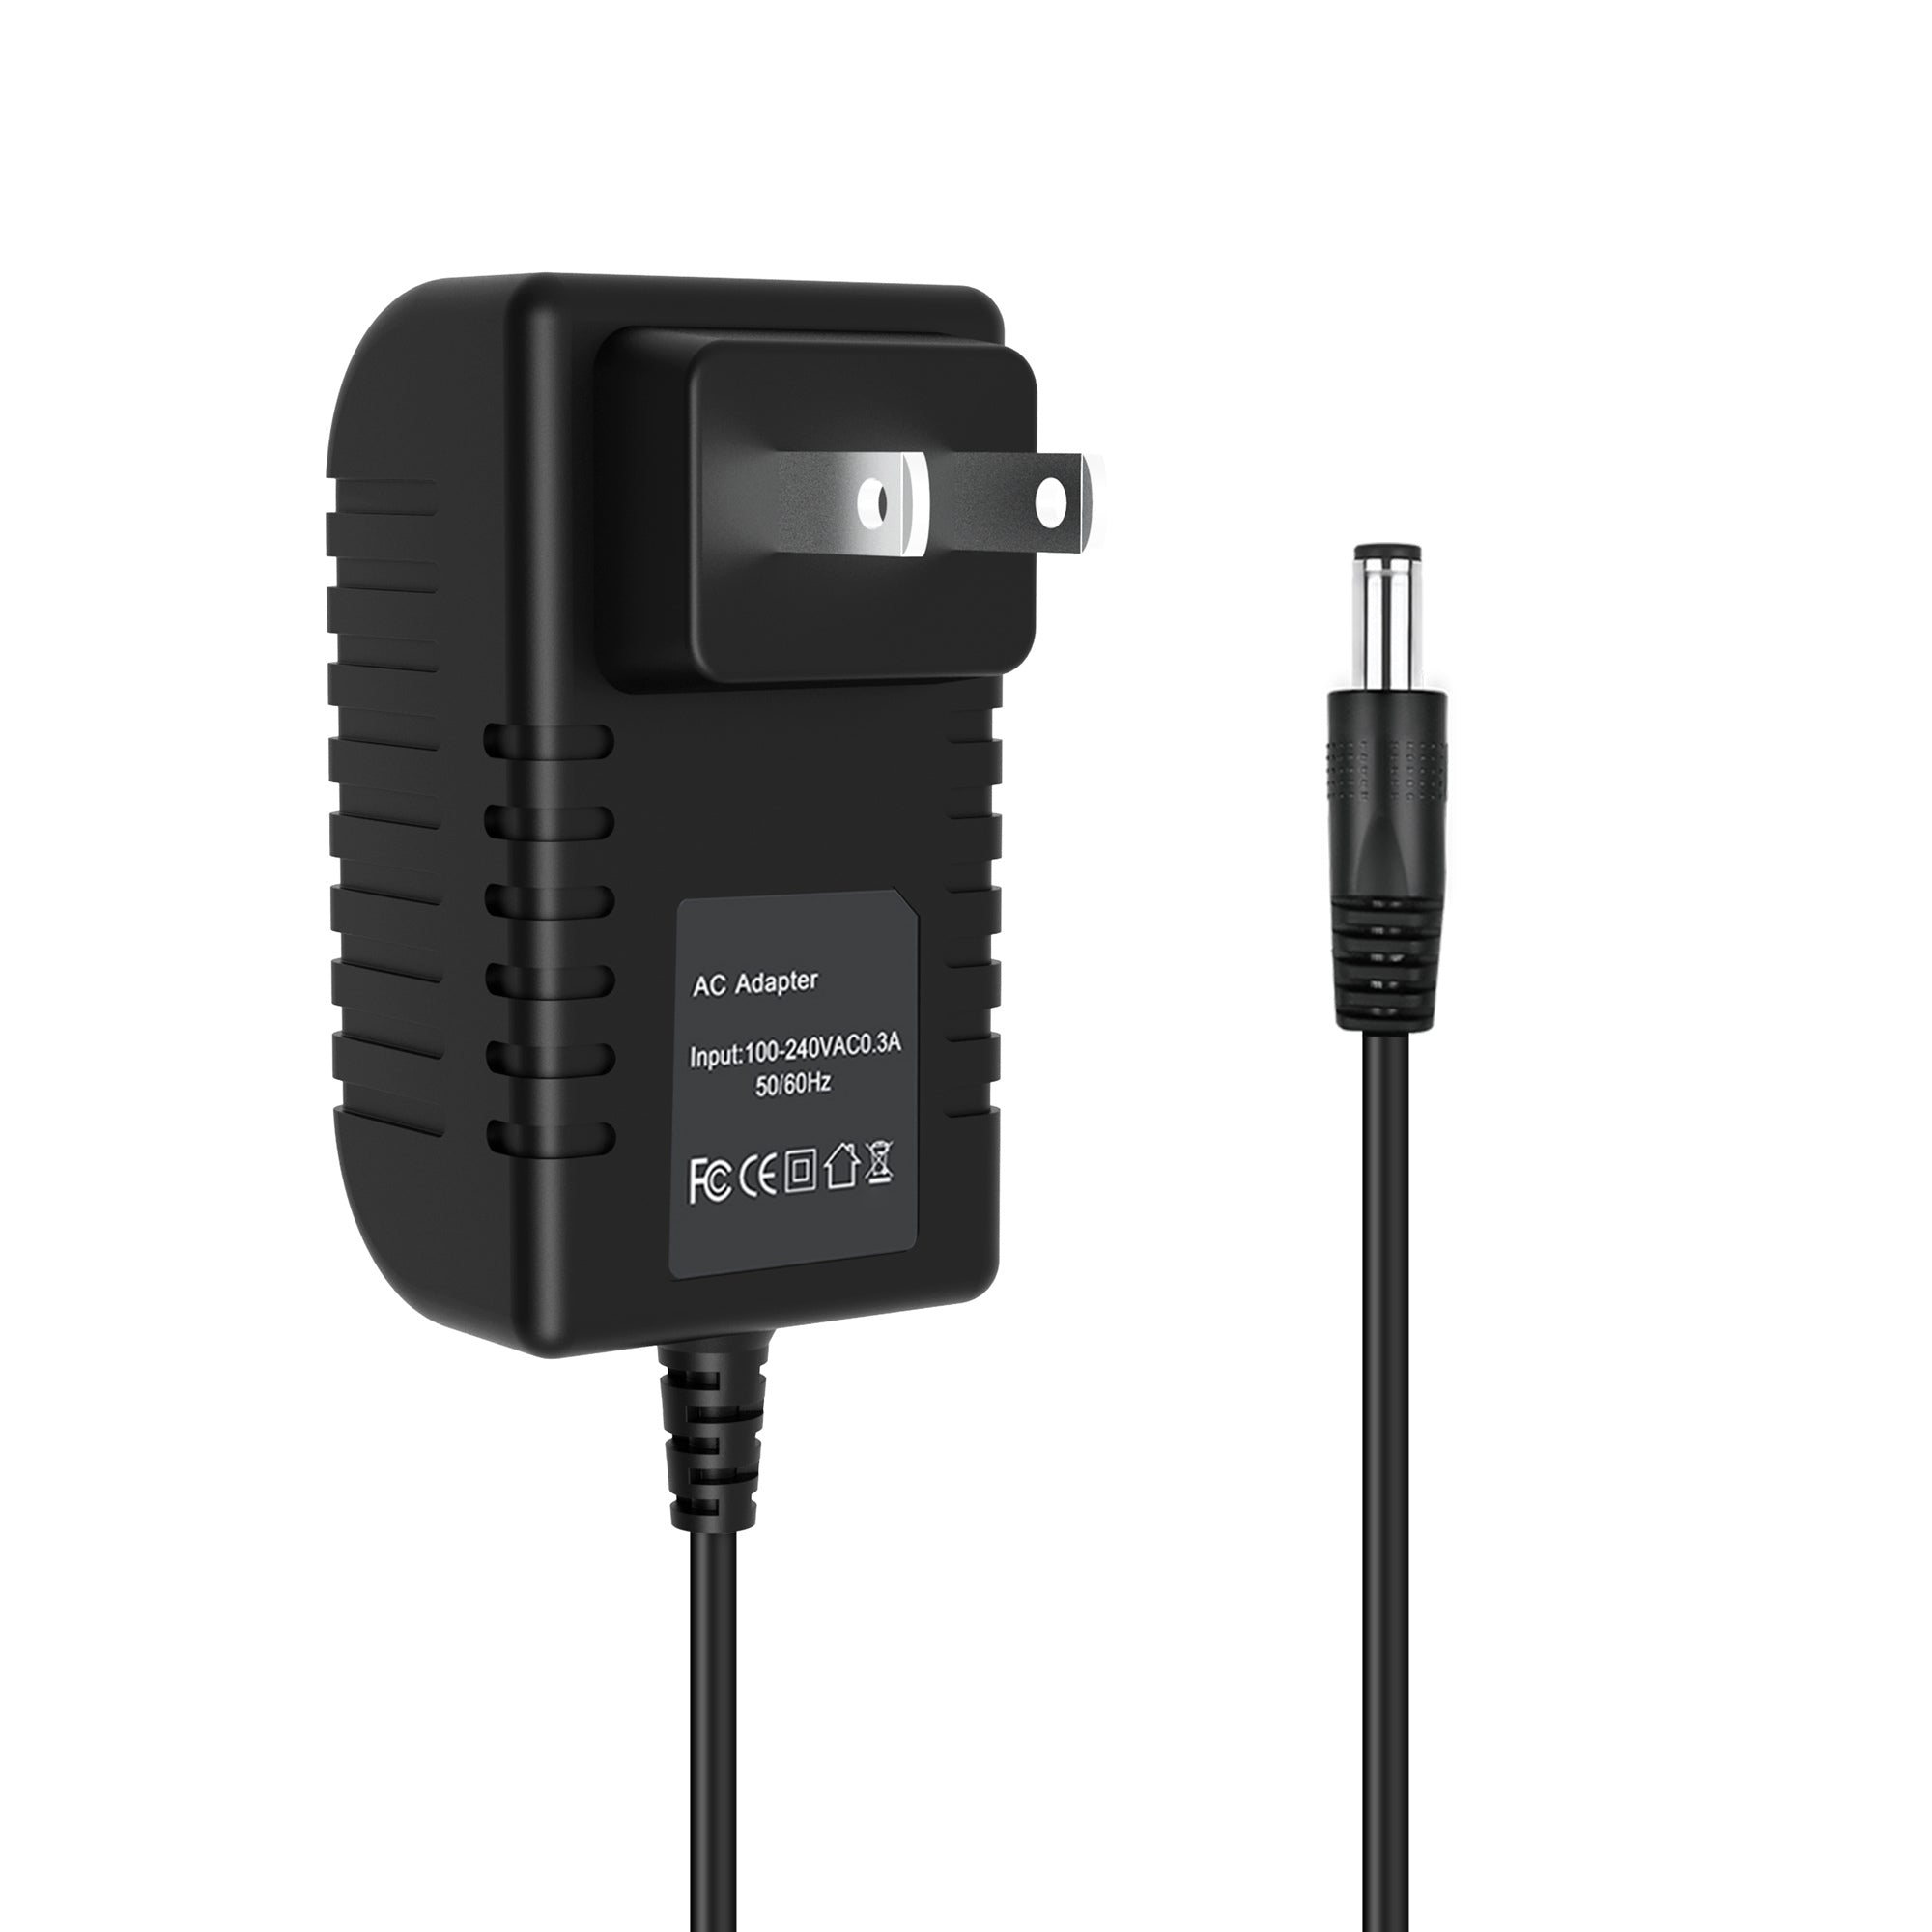 AbleGrid AC Adapter Wall Charger Power Supply Compatible with Pioneer DDJ-SX3 DDJ-RX Serato Mixer